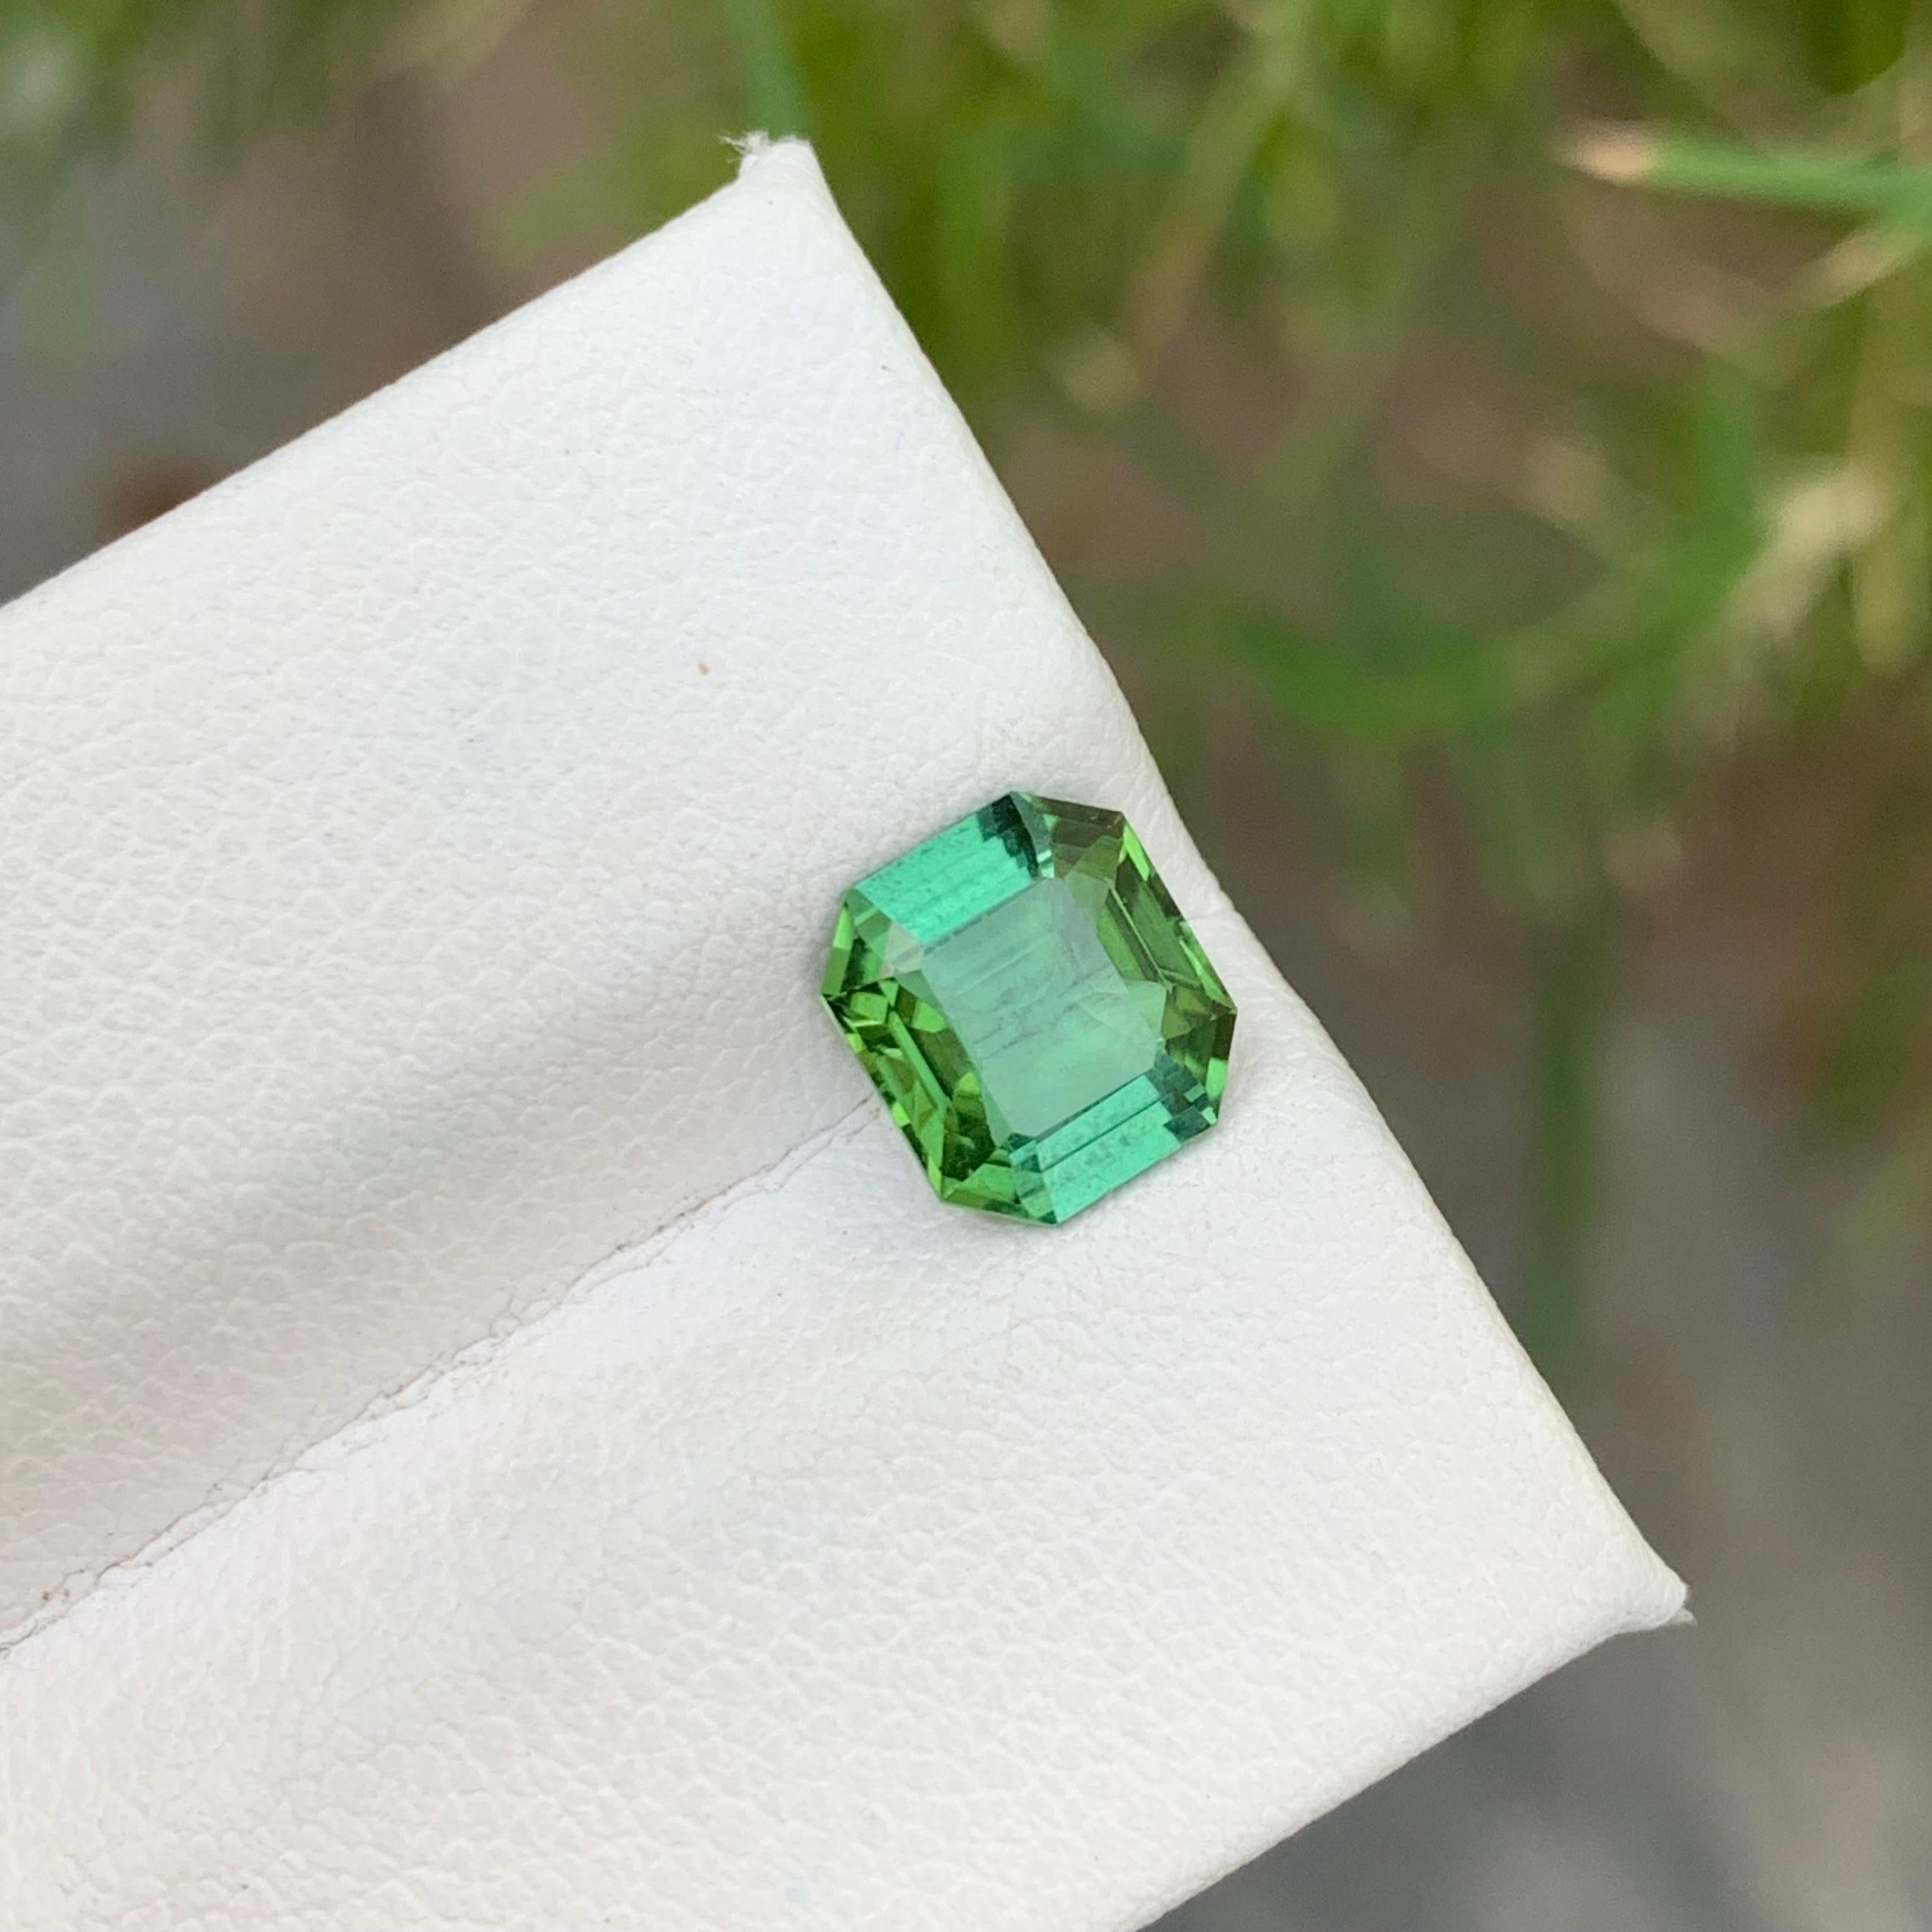 Gemstone Type : Tourmaline
Weight : 1.65 Carats
Dimensions : 7.9x7.1x4.2 Mm
Origin : Kunar Afghanistan
Clarity : Eye Clean
Shape: Emerald 
Color: Mintgreen
Certificate: On Demand
Basically, mint tourmalines are tourmalines with pastel hues of light